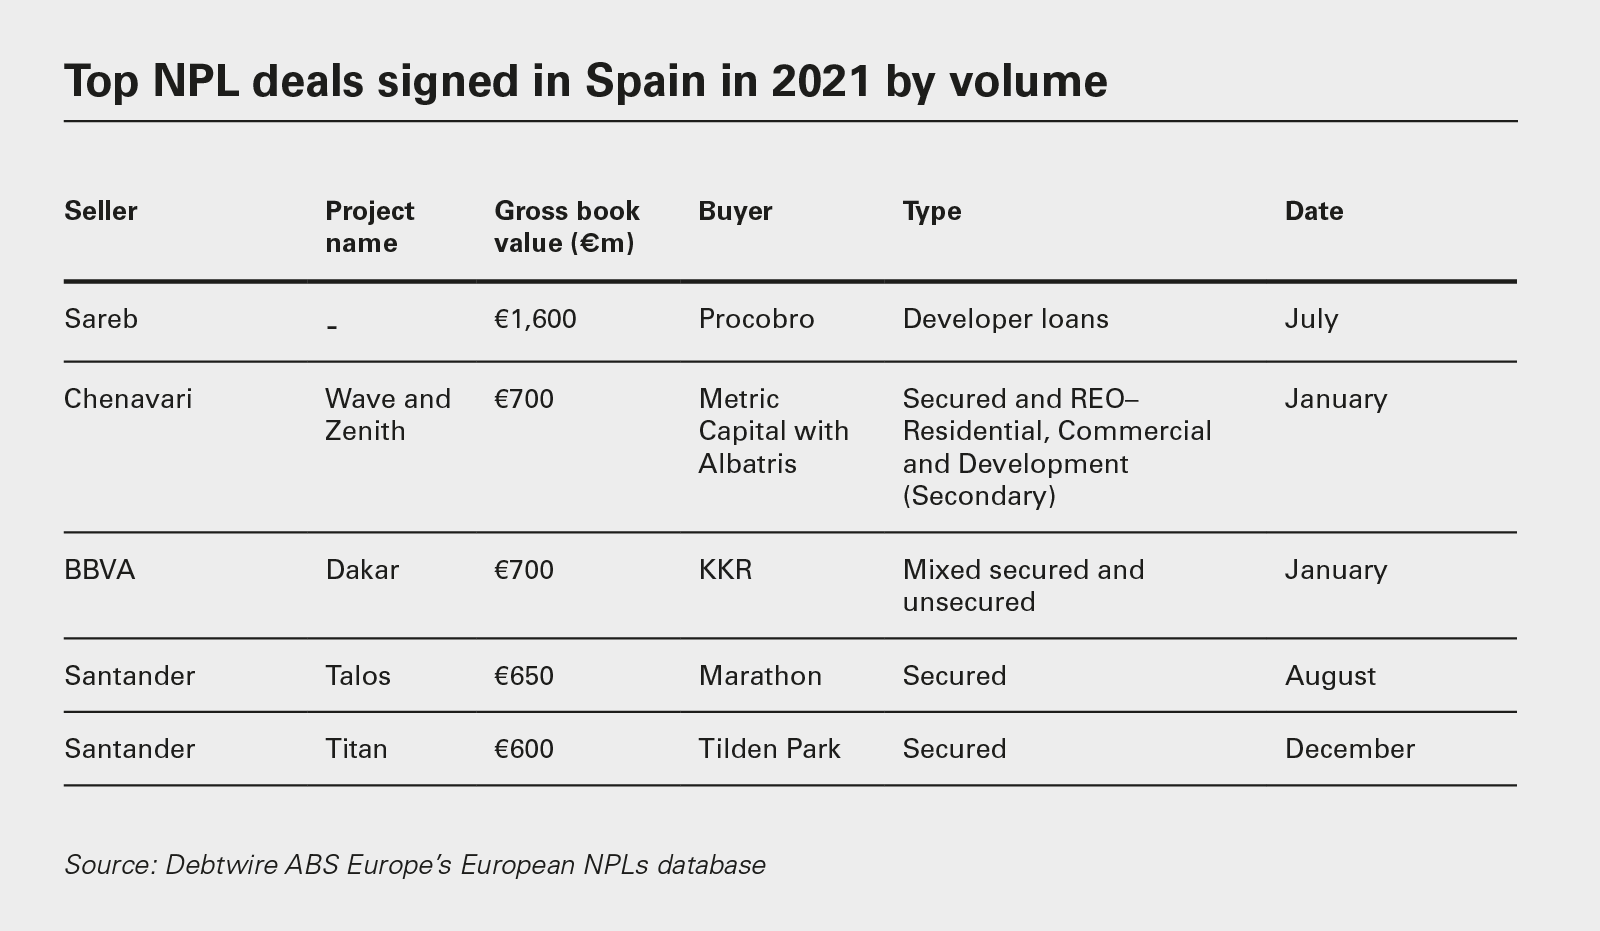 Top NPL deals signed in Spain in 2021 by volume